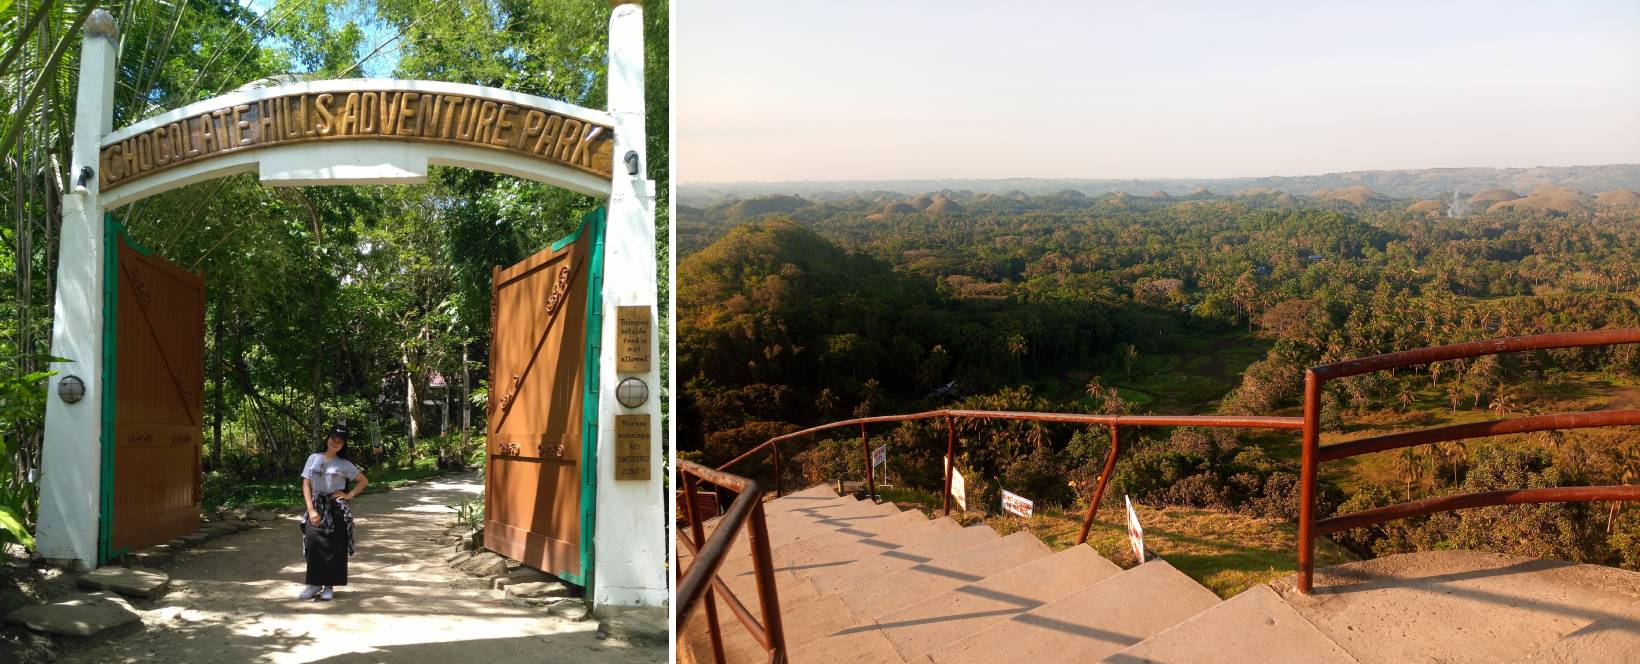 10 Things to do in Bohol - Chocolate Hills Adventure Park